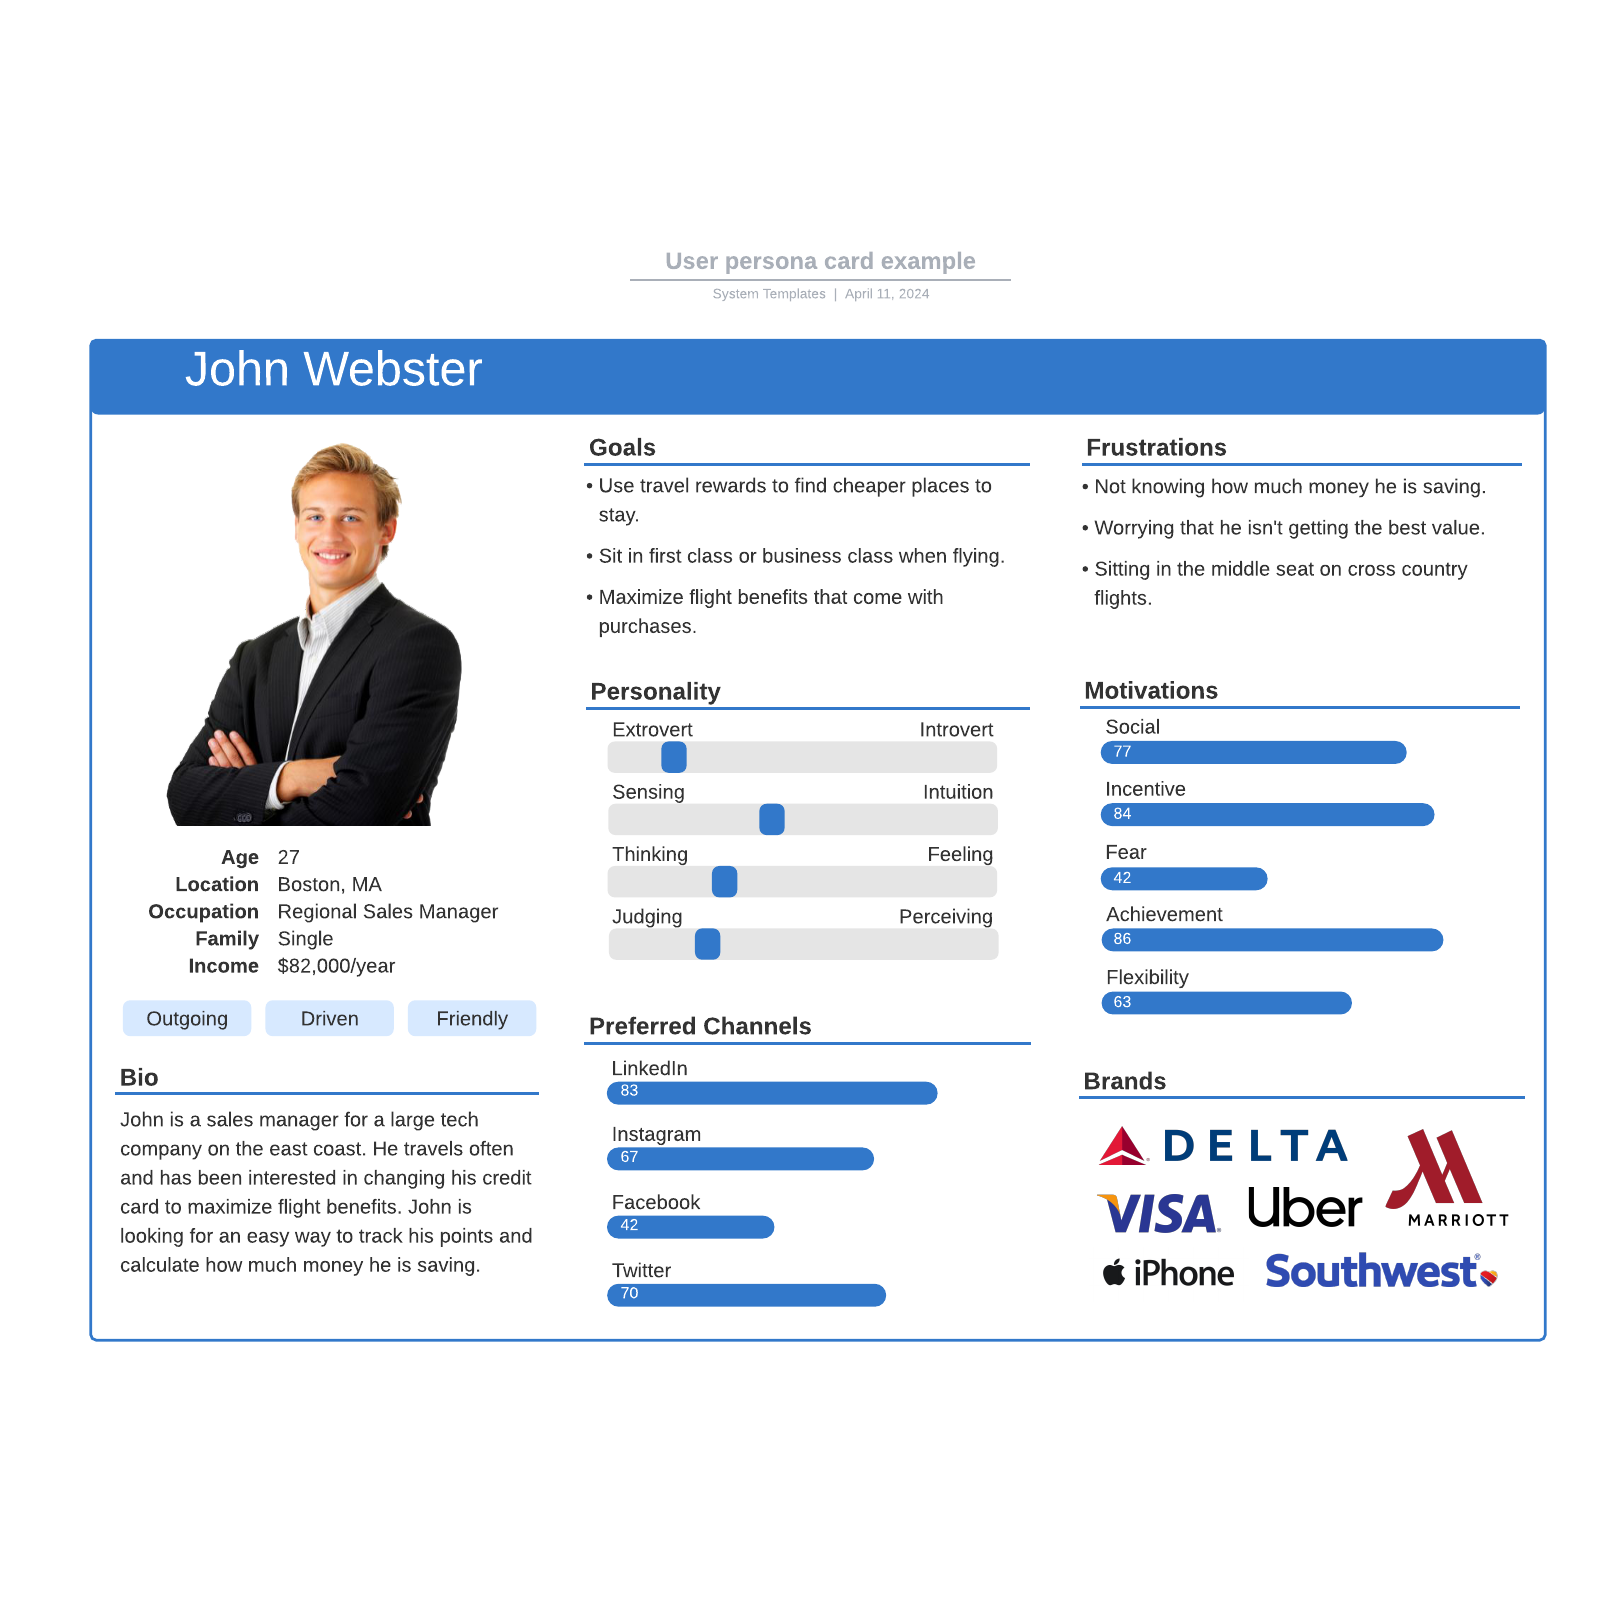 User persona card example example